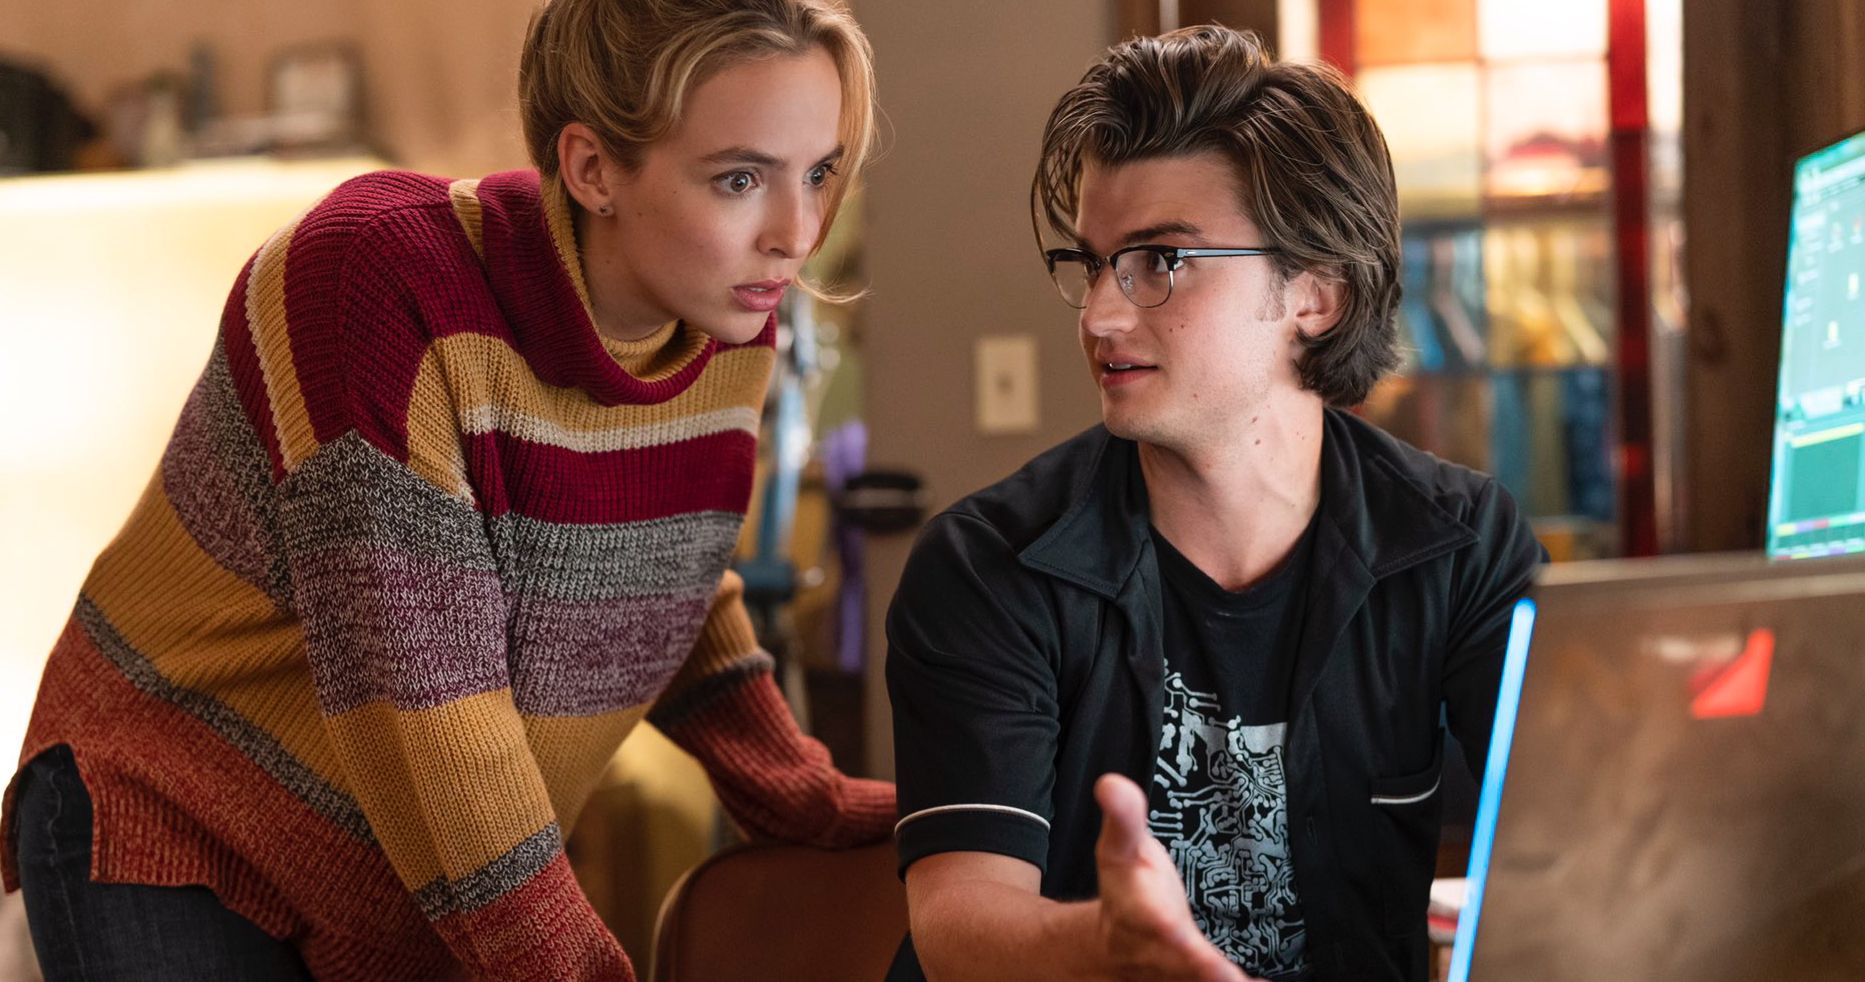 Free Guy Co-Star Joe Keery Calls It a Mix of Back to the Future &amp; The Truman Show